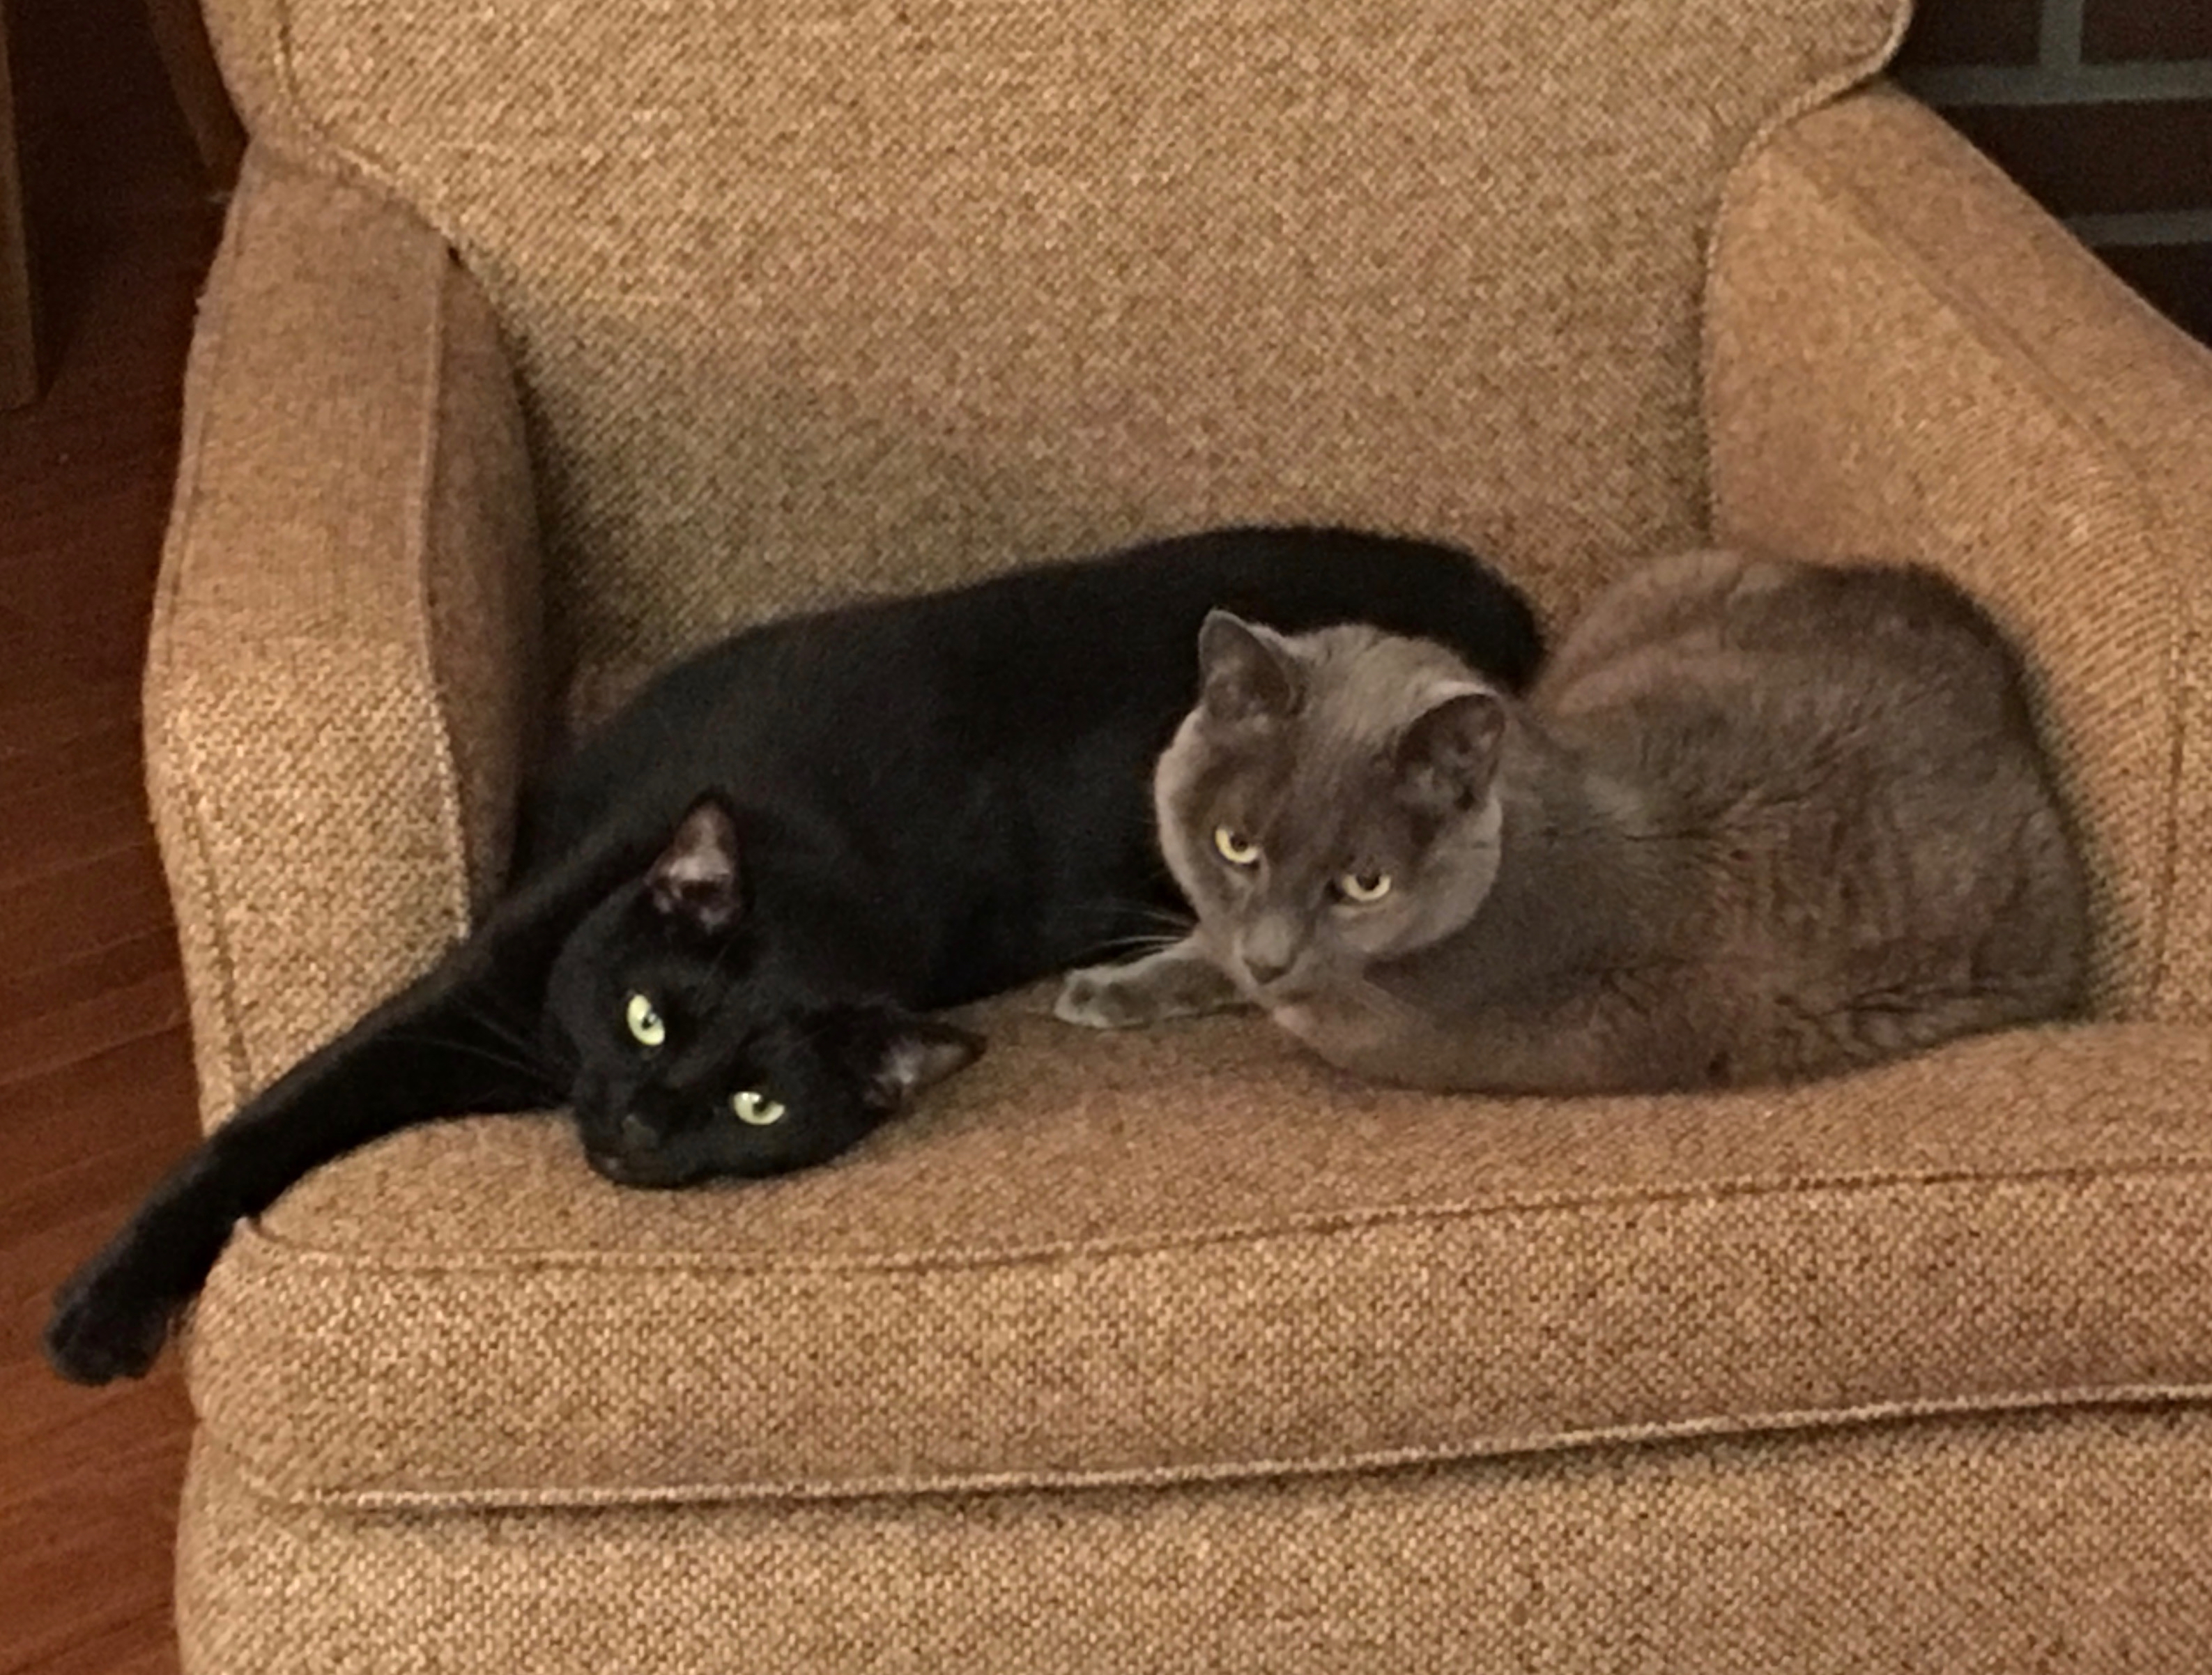 Didn't happen often but they DID get along